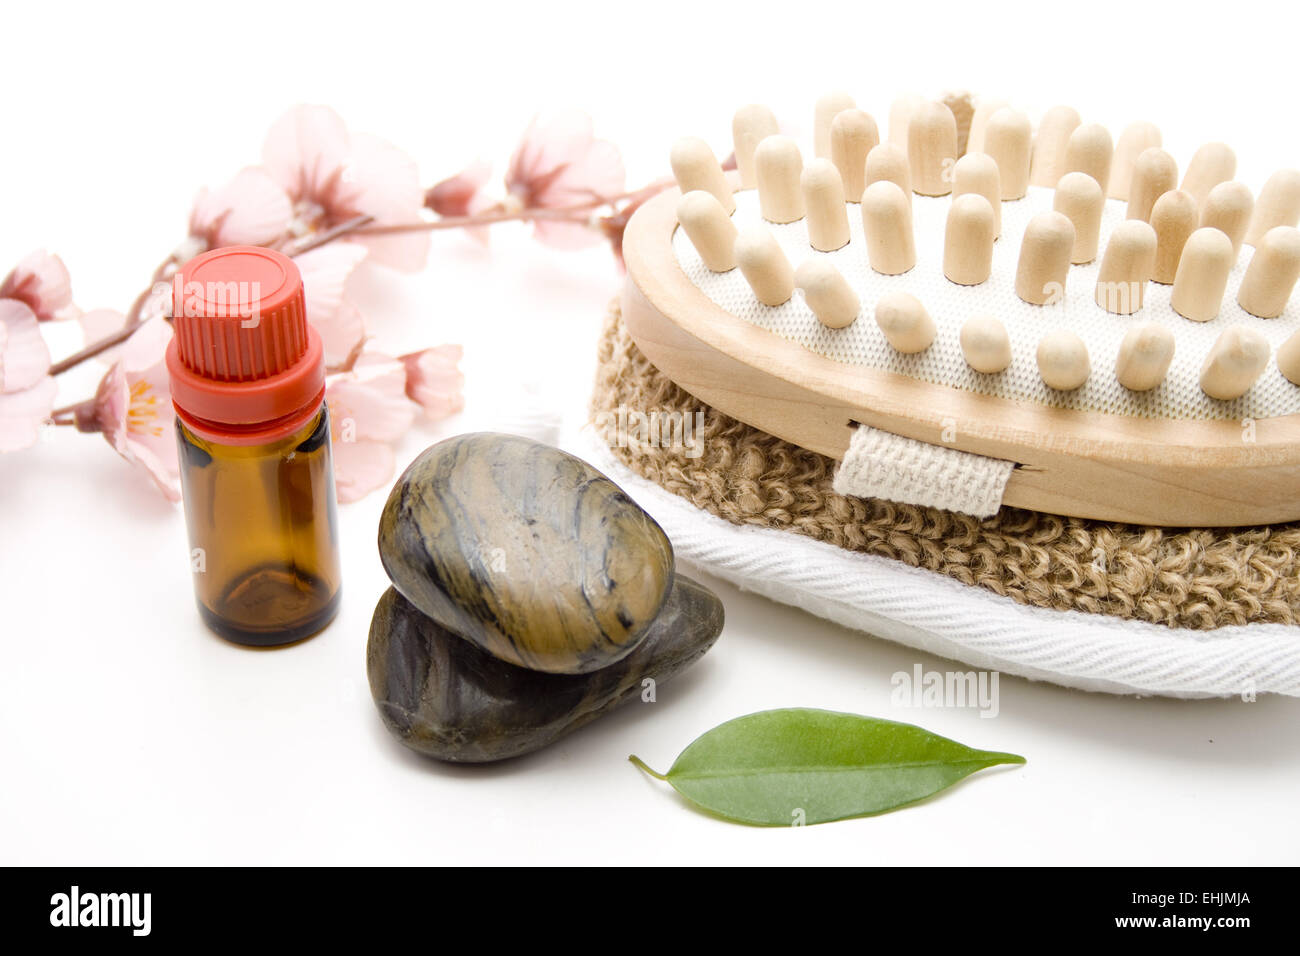 Massage brush with smell oil Stock Photo